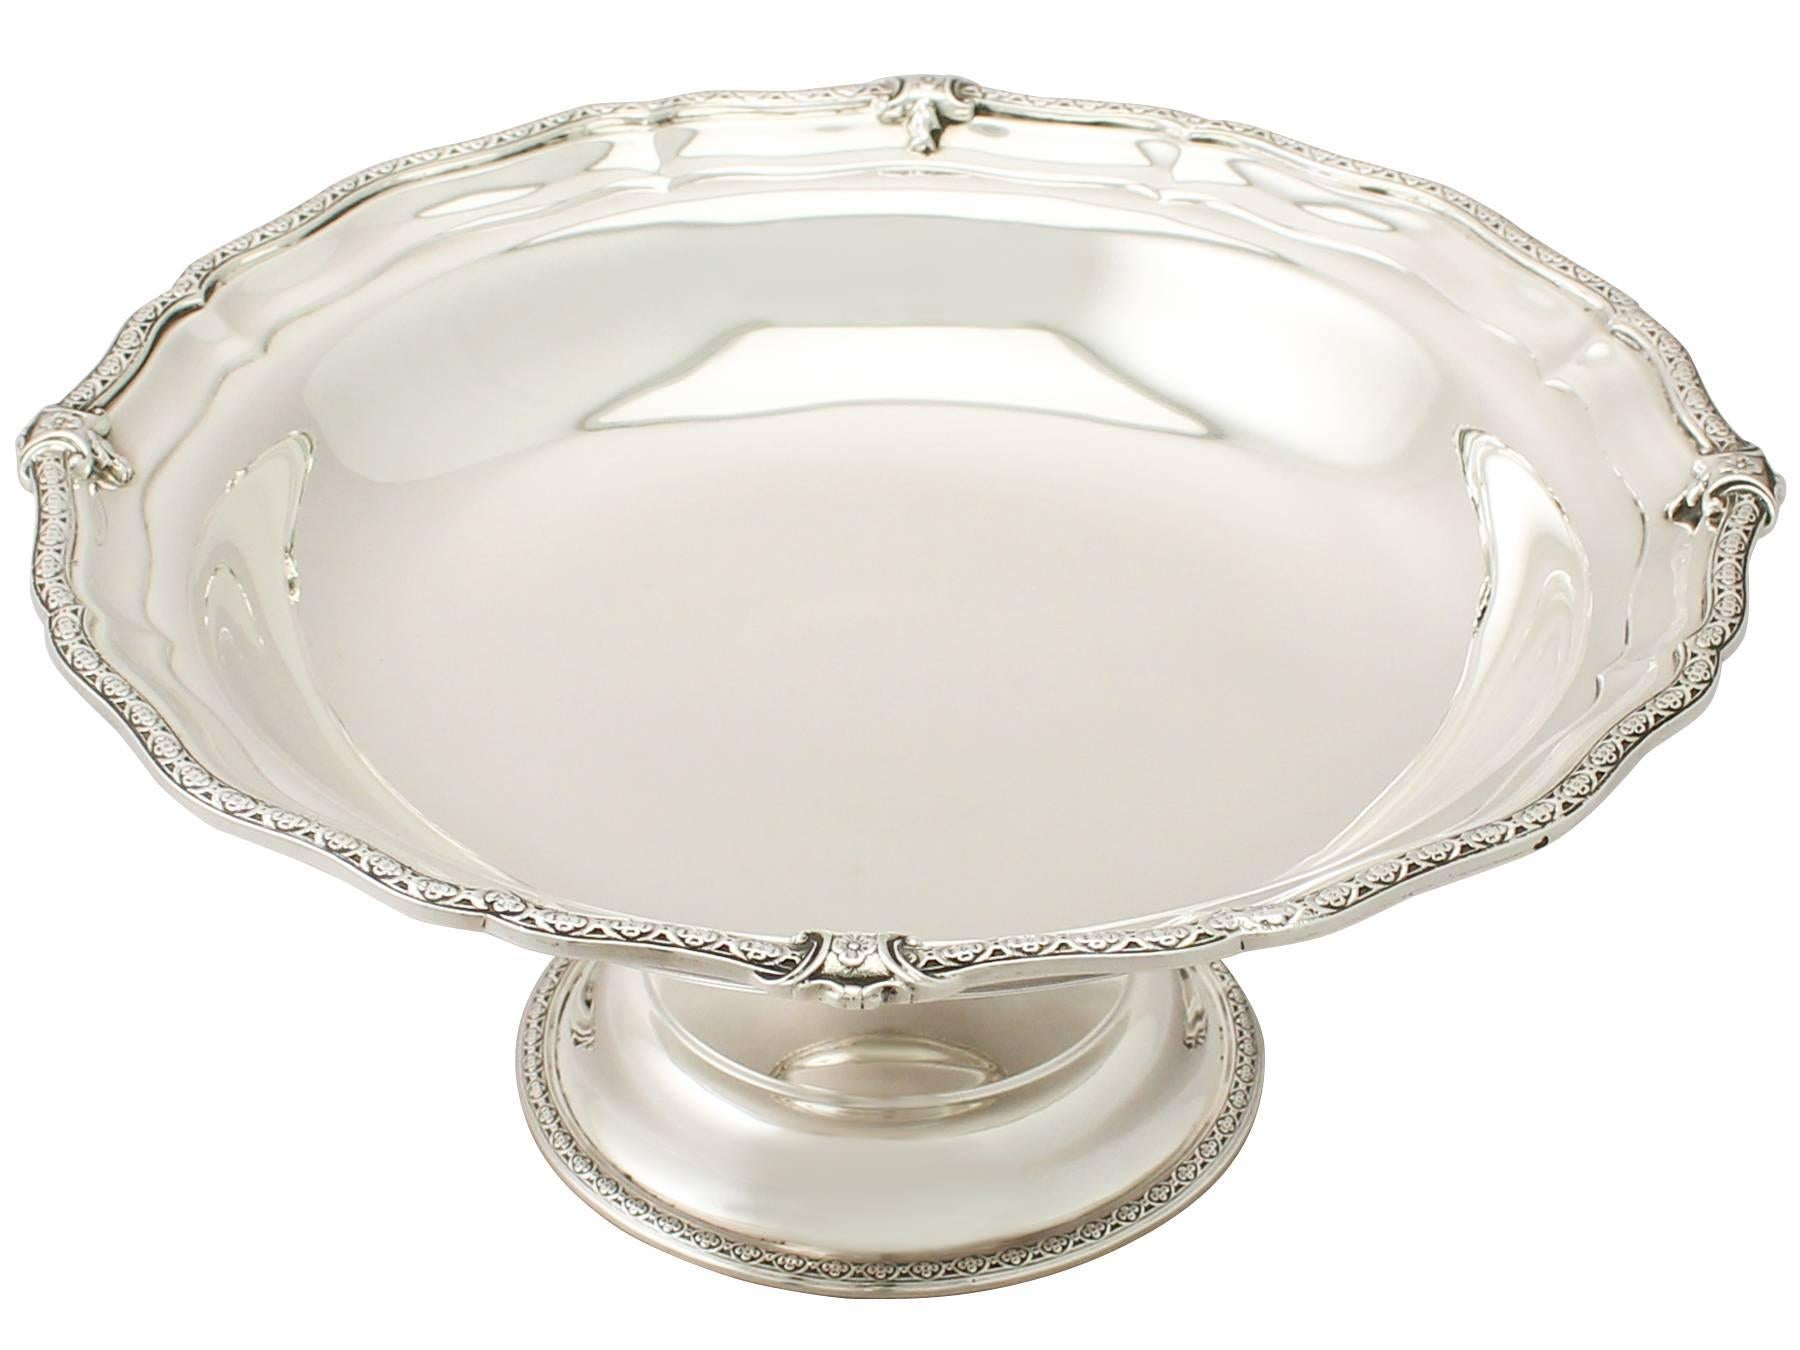 An exceptional, fine and impressive antique George V English sterling silver fruit dish; an addition to our silver dining collection.

This exceptional antique George V sterling silver fruit dish has a circular shaped form onto a cylindrical